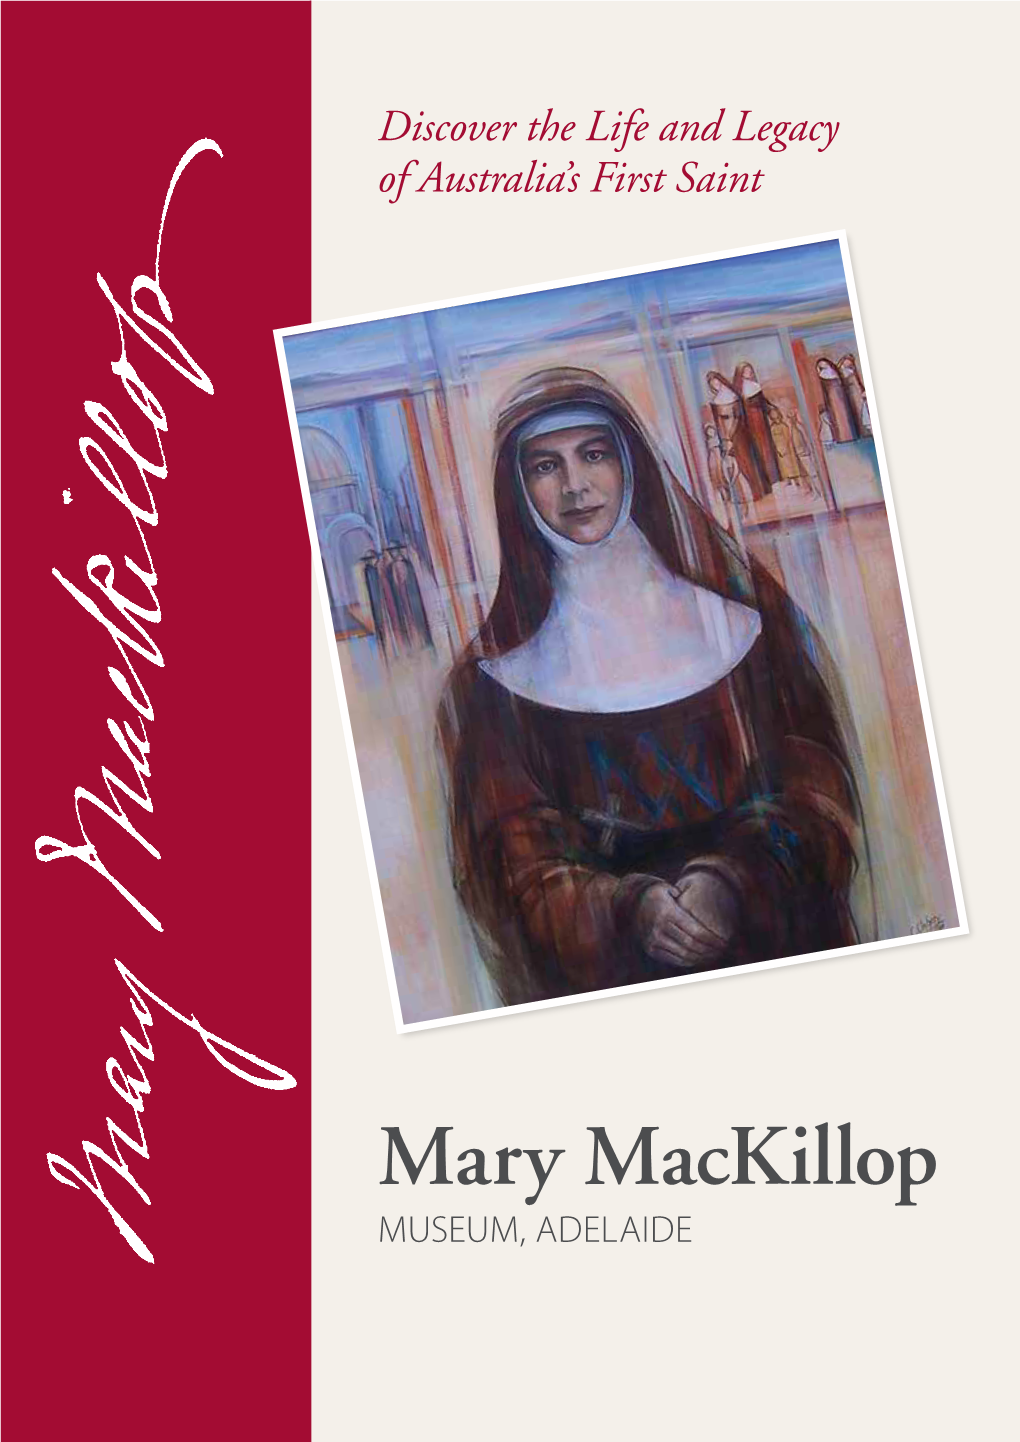 Mary Mackillop MUSEUM, ADELAIDE